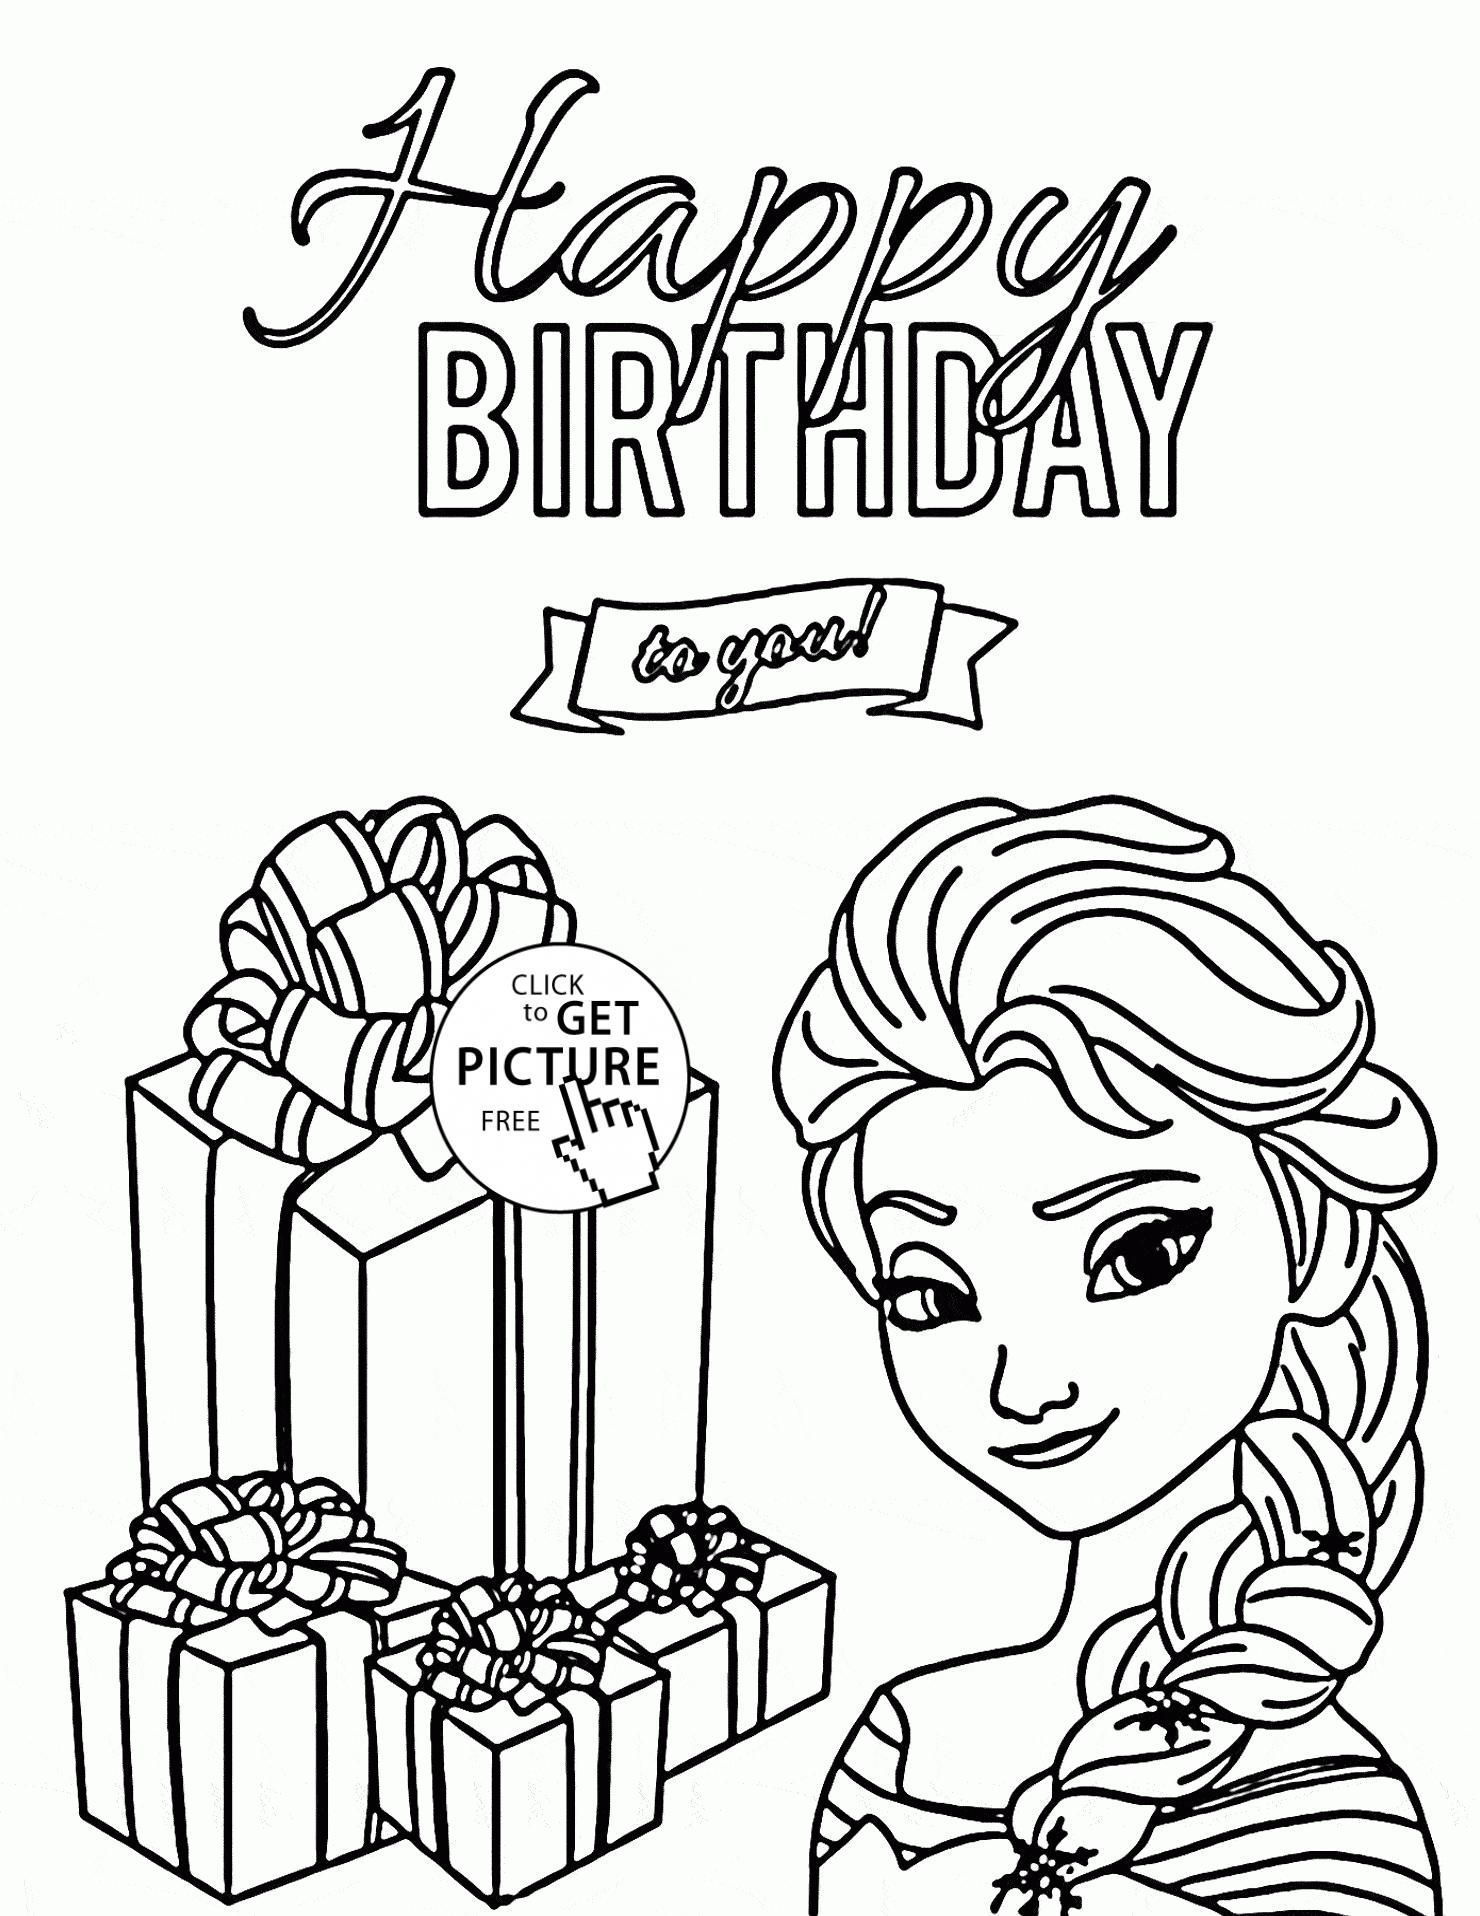 Frozen Birthday Coloring Pages at GetColorings.com | Free printable ...